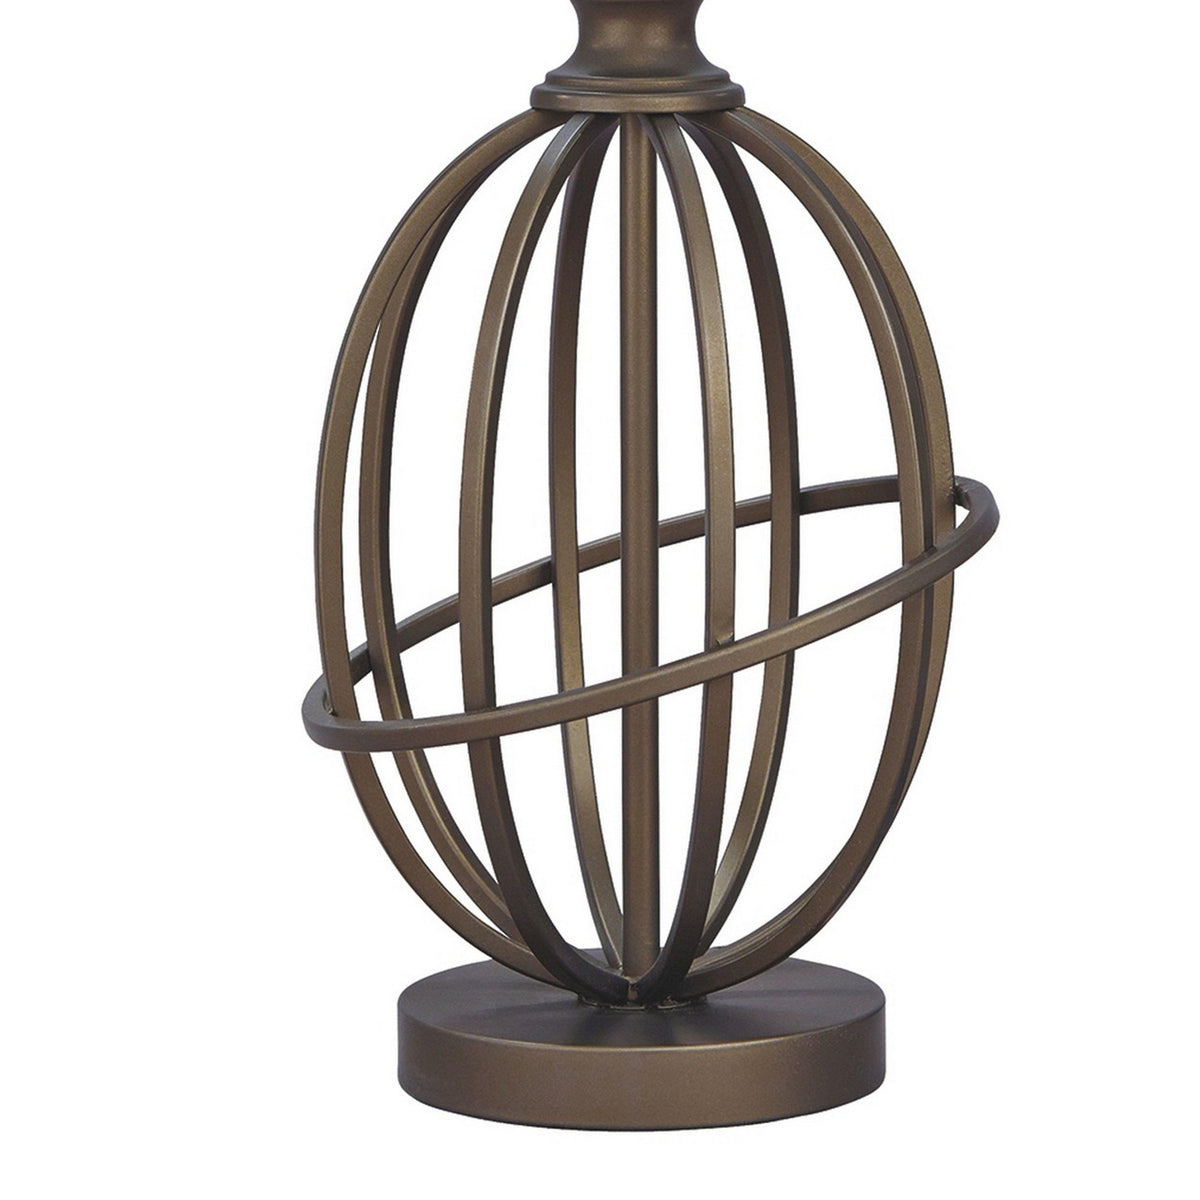 Armillary Metal Base Table Lamp with fabric Shade, White and Bronze - BM230981